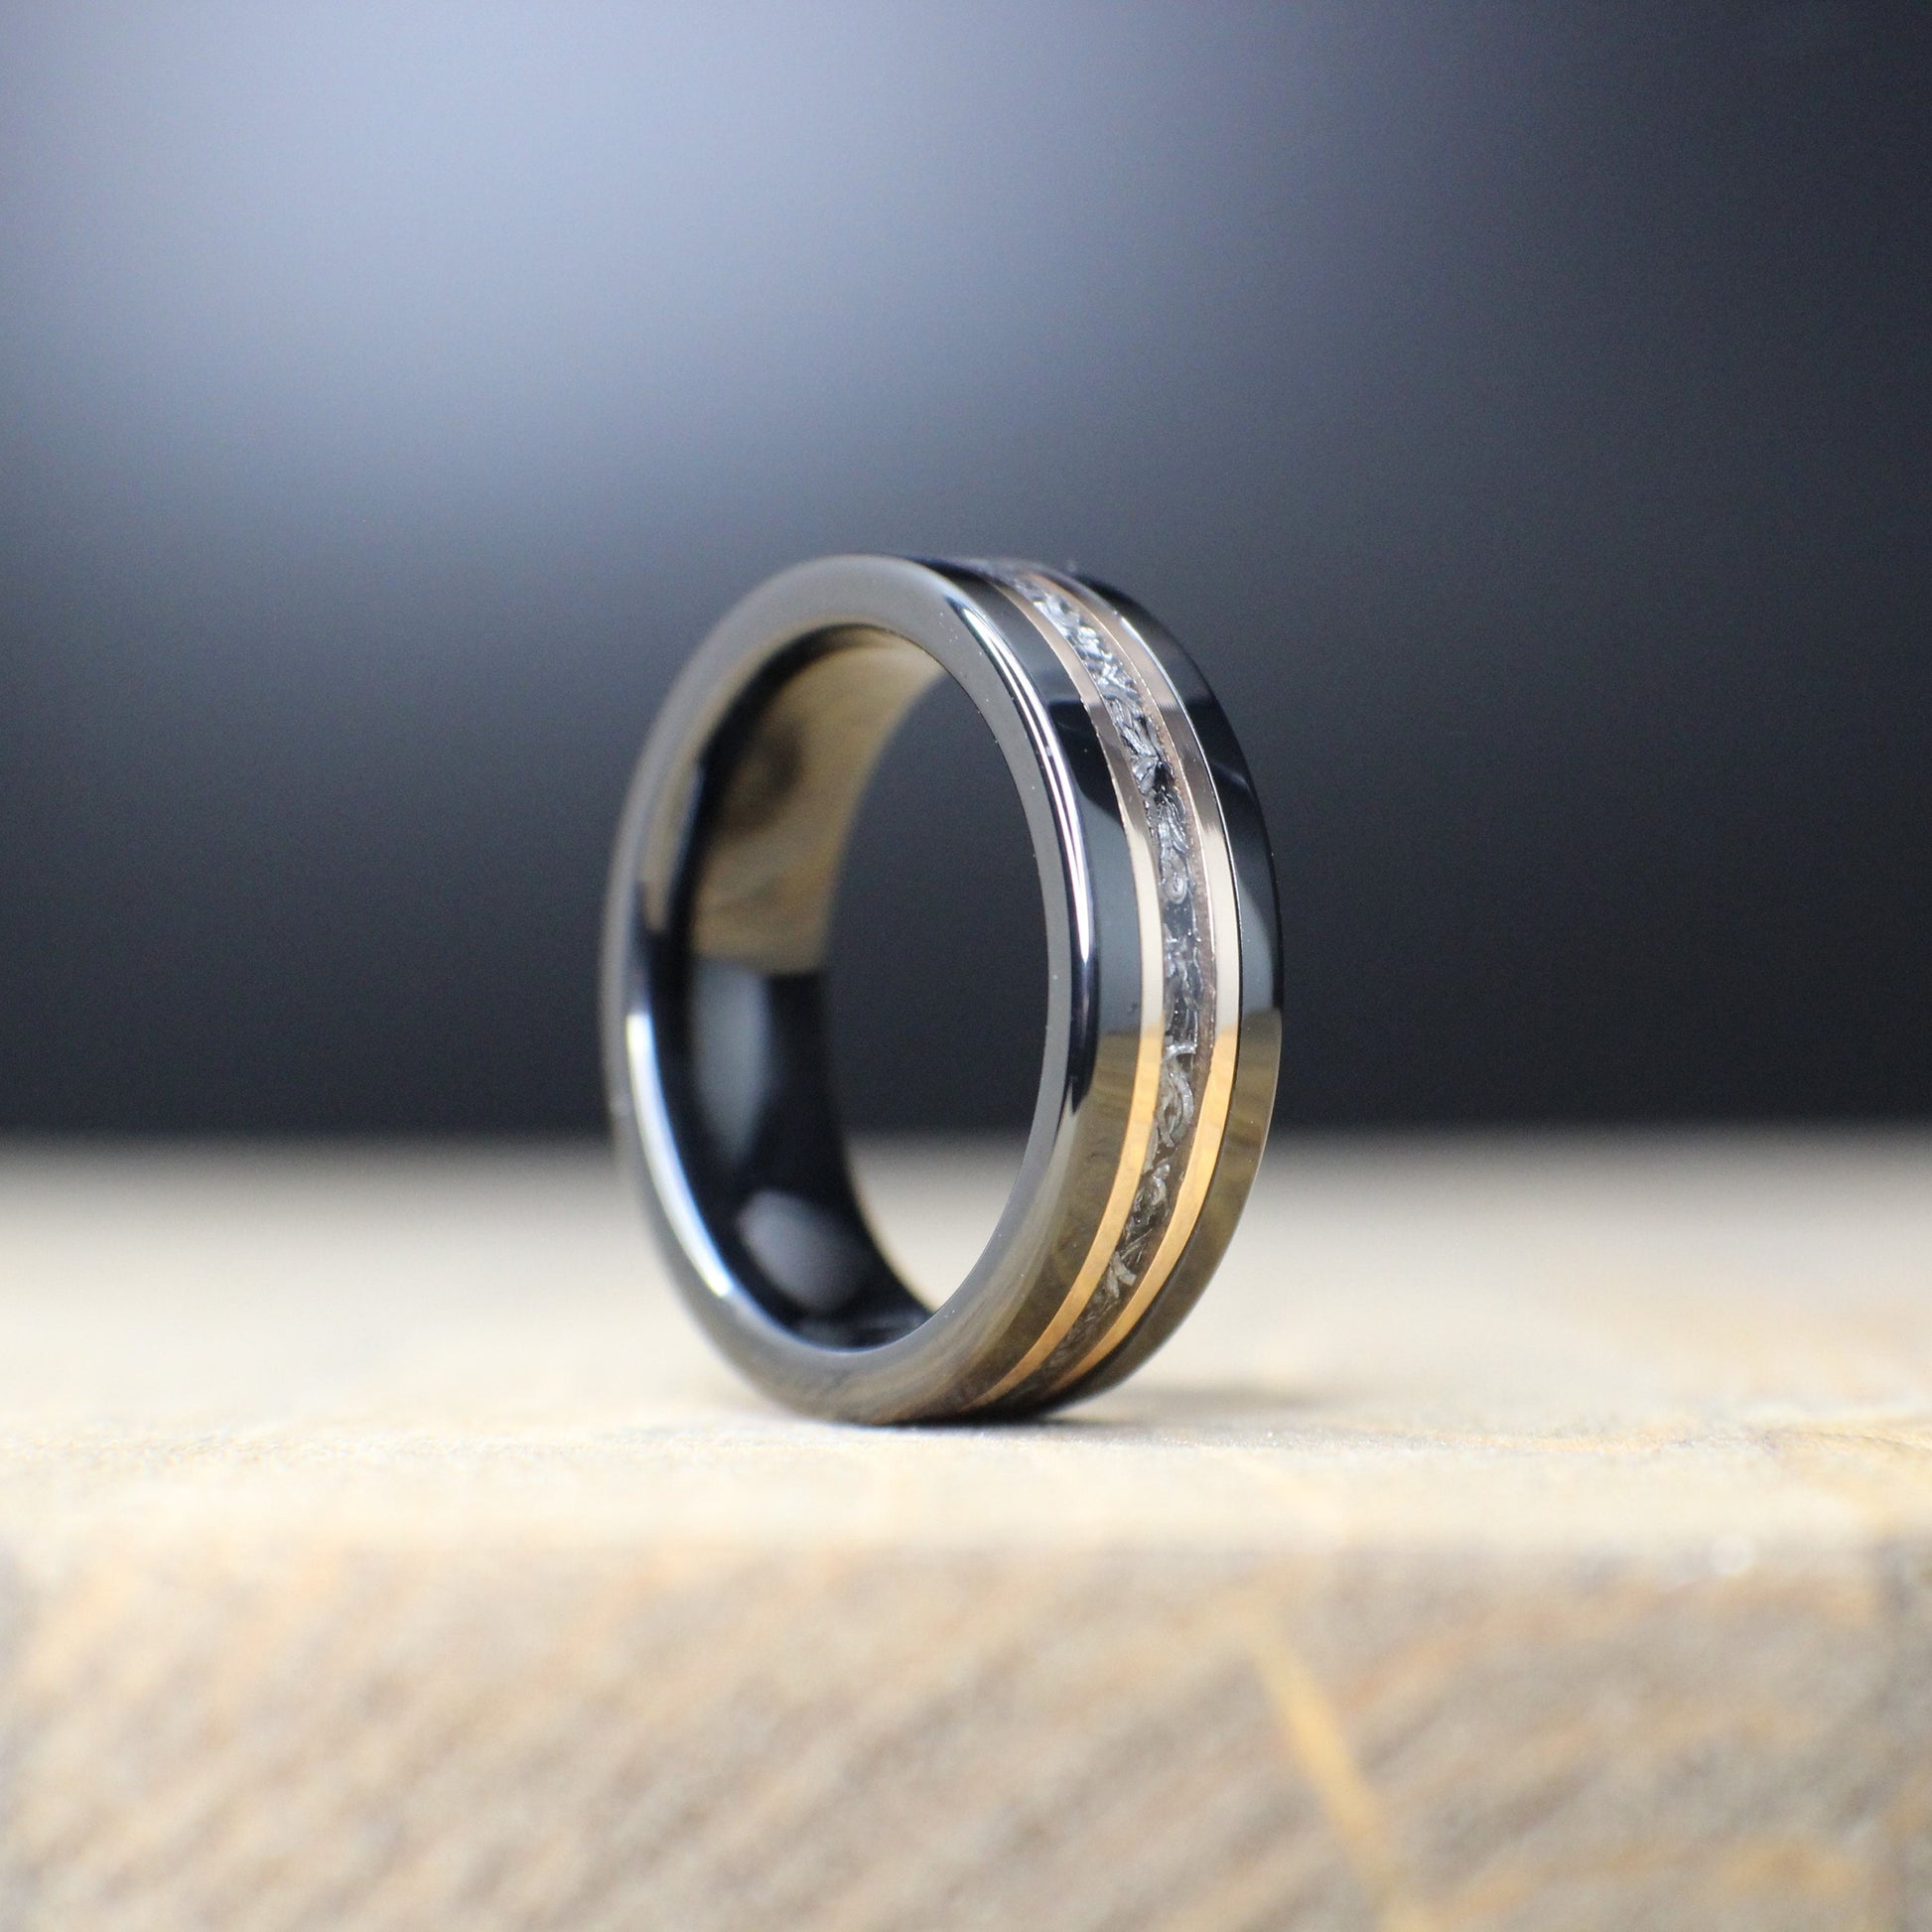 Gold ring with meteorite